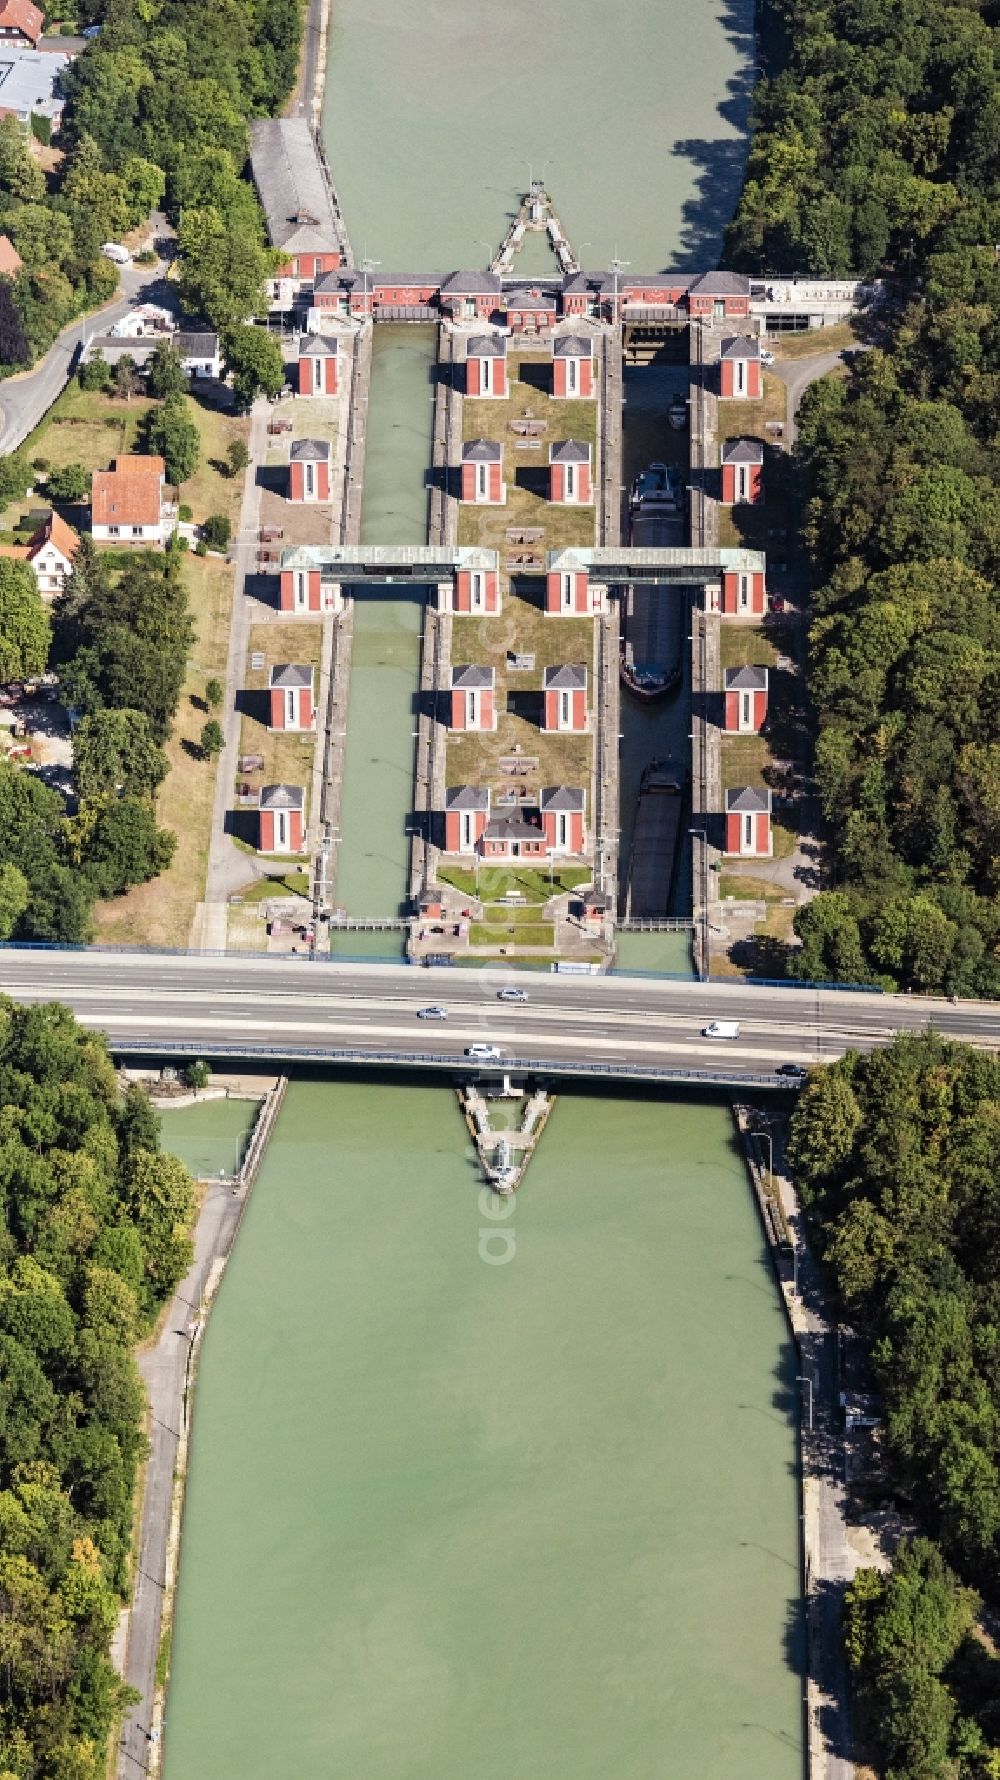 Sehnde from the bird's eye view: Lockage of the Anderten on Mittelkonal in Sehnde in the state Lower Saxony, Germany